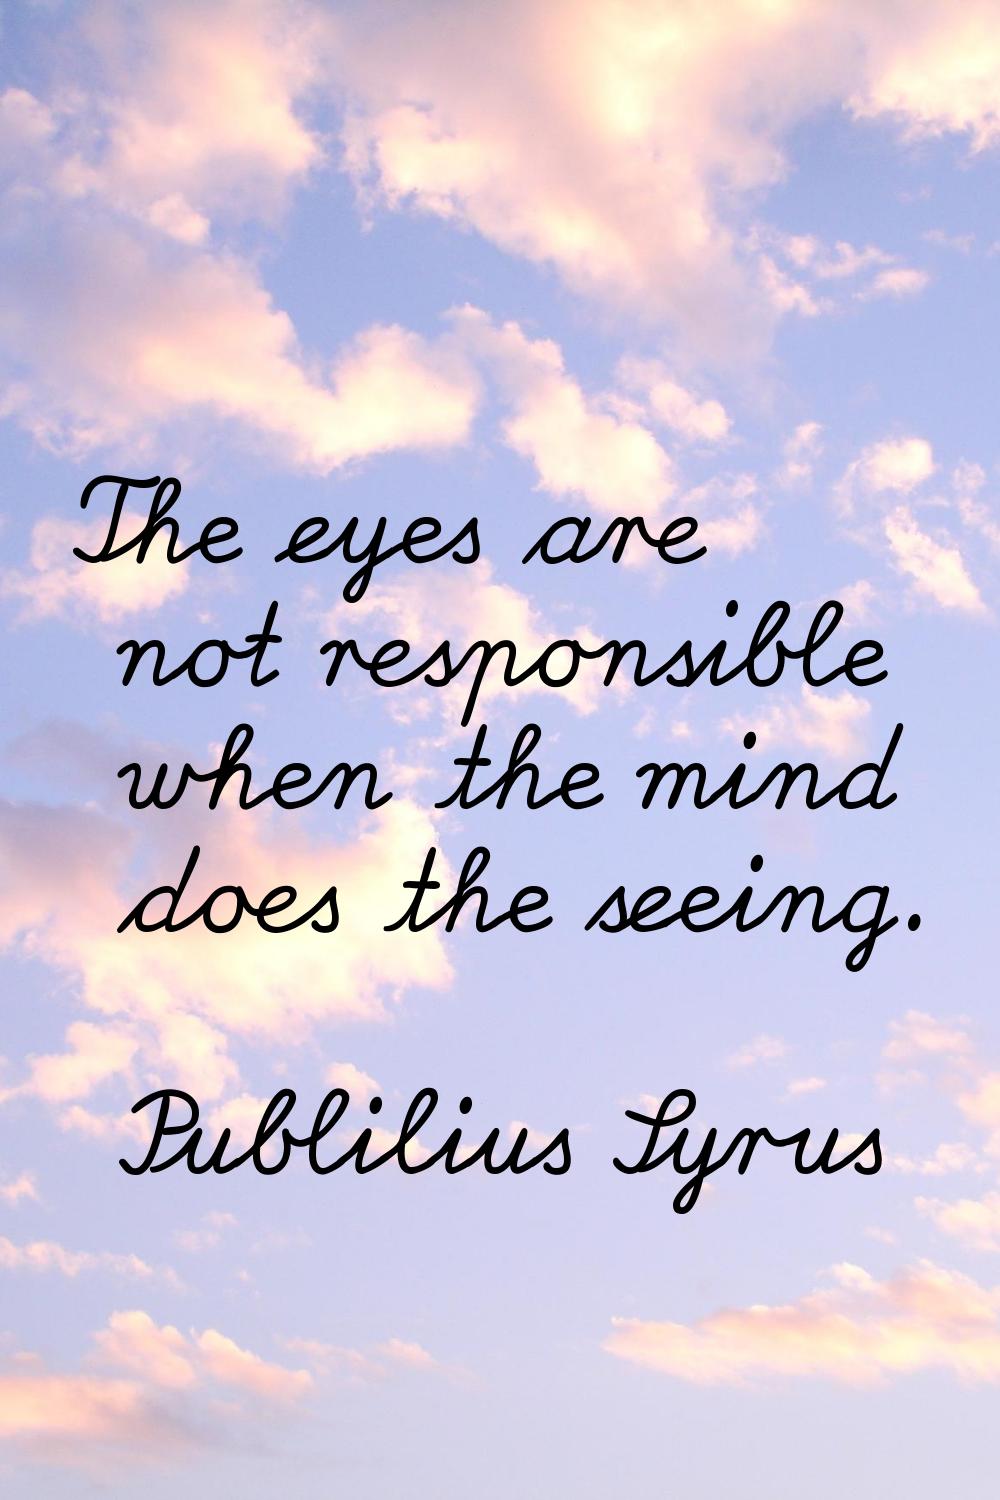 The eyes are not responsible when the mind does the seeing.